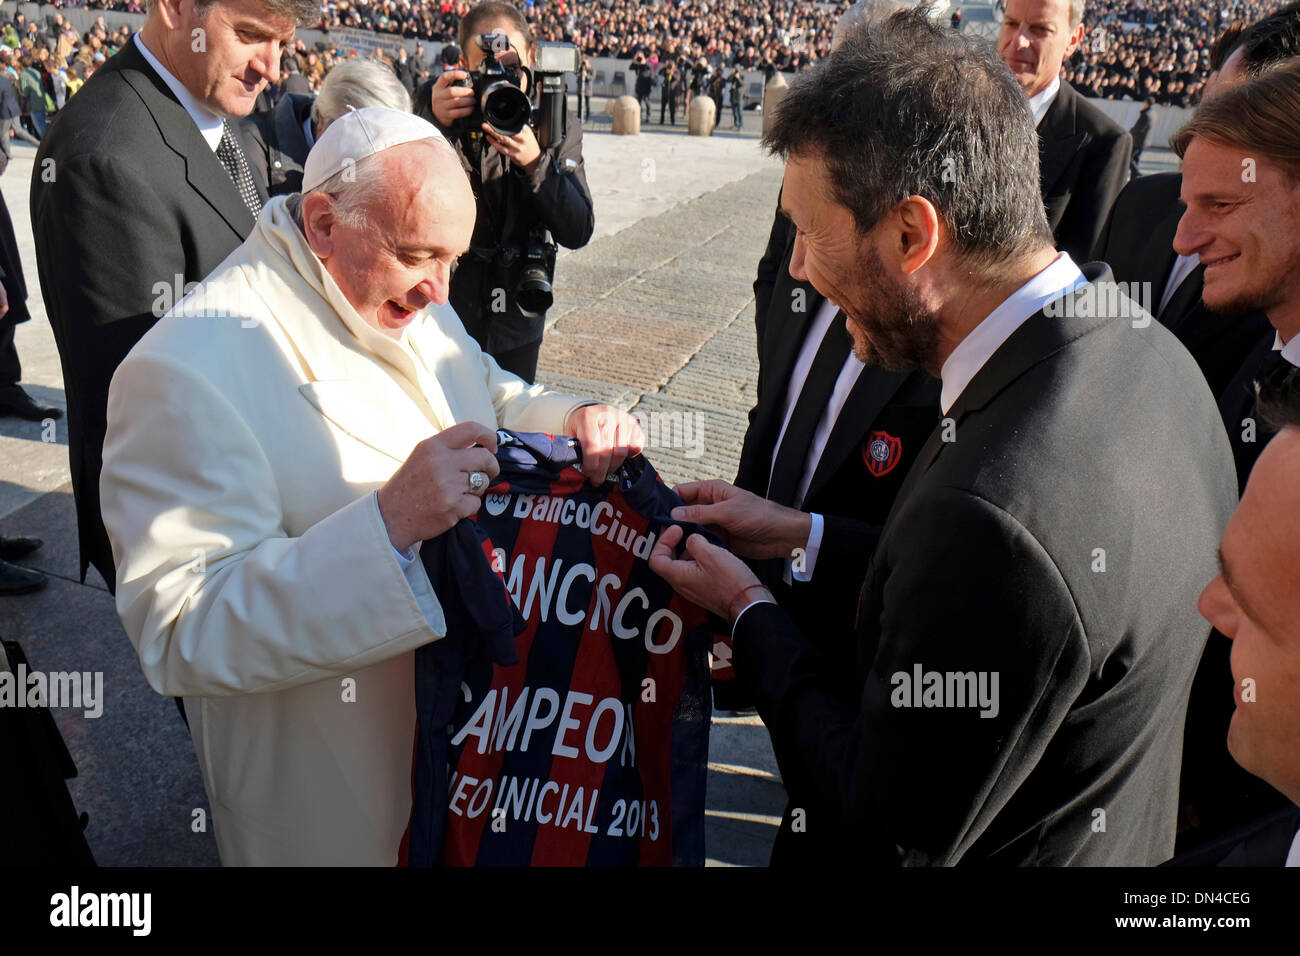 Vatican, Rome, Italy. 18th December 2013.  St Peter square General Audience of 18 Dec 2013 The soccer team San Lorenzo de Almagro meet Pope Francis Credit:  Realy Easy Star/Alamy Live News Stock Photo